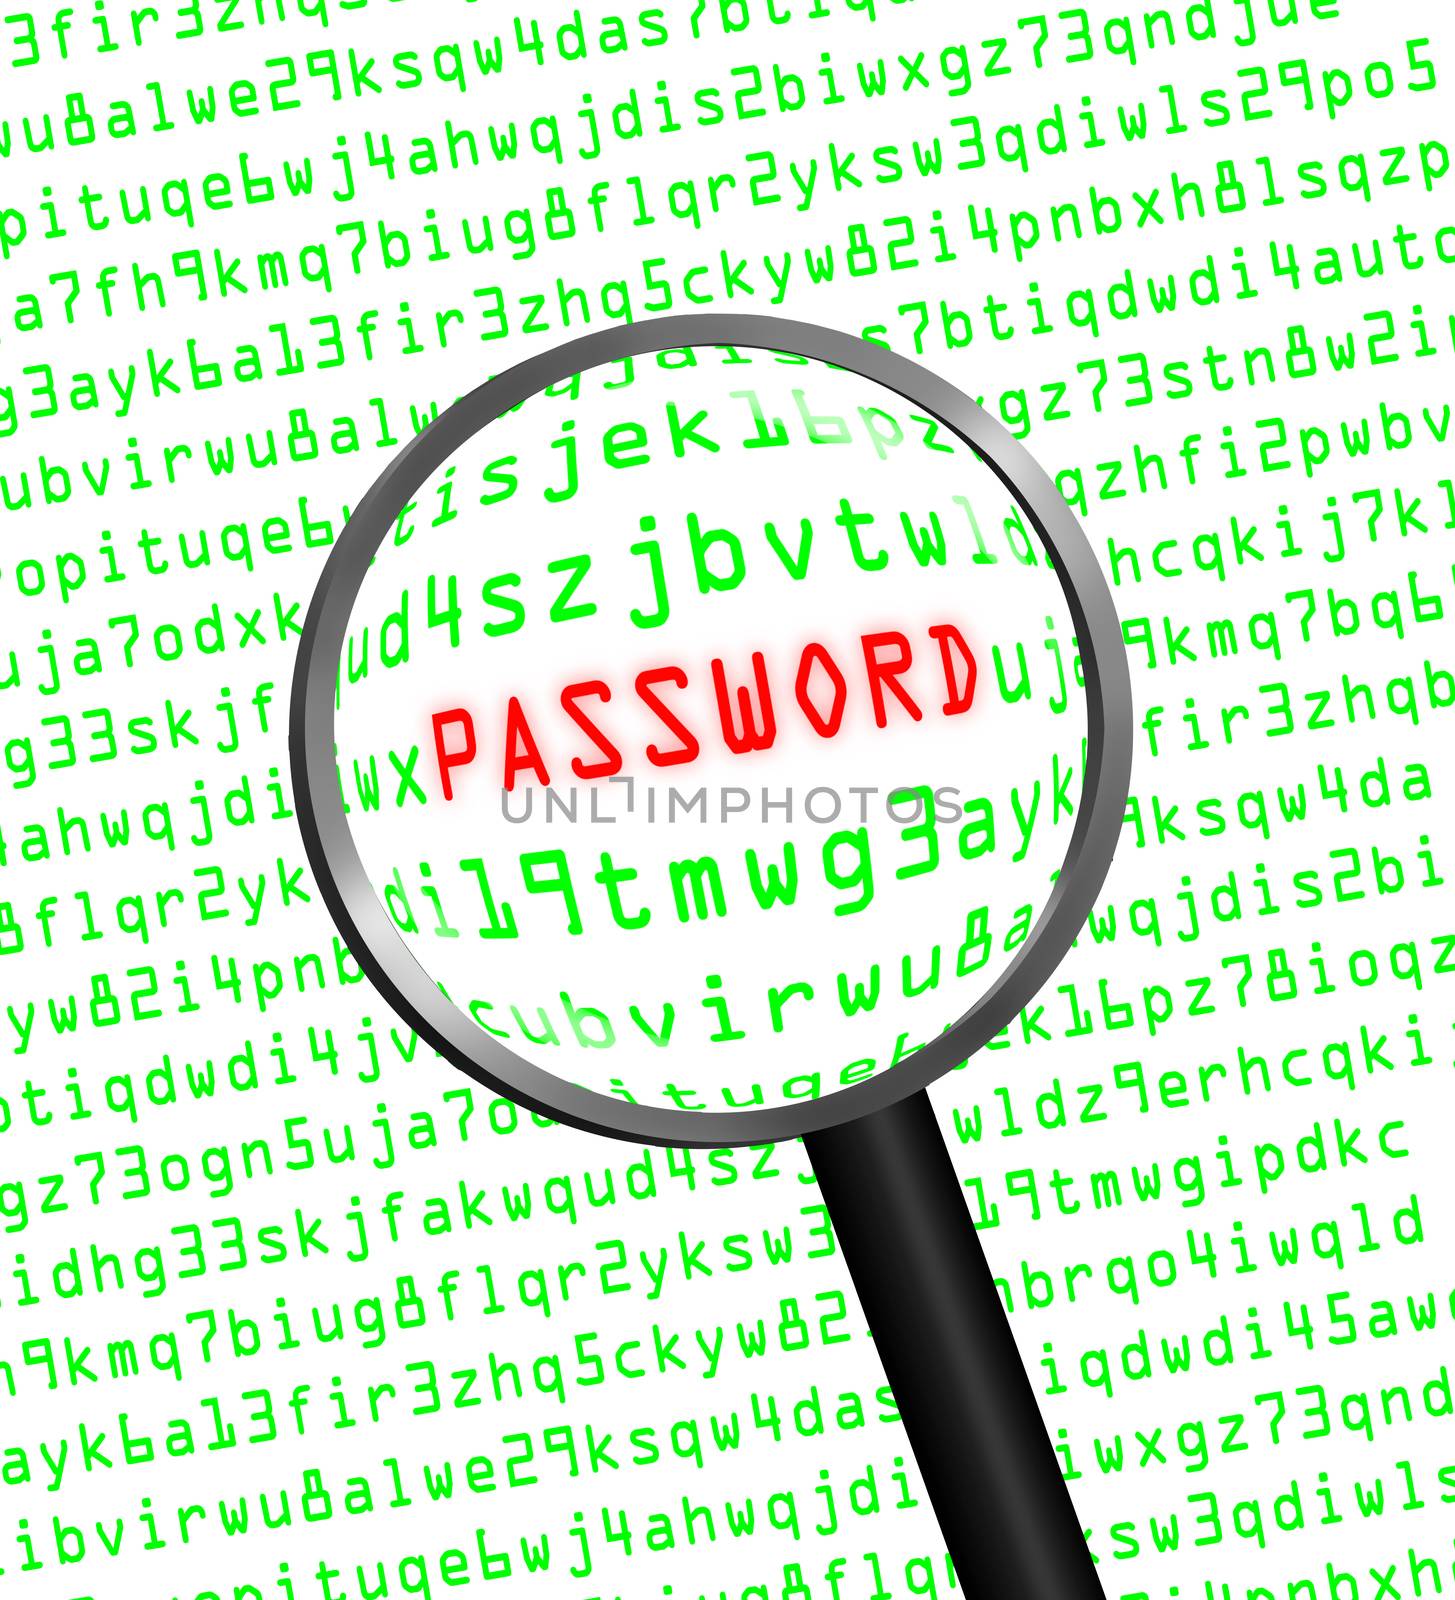 PASSWORD revealed in computer code through a magnifying glass by Balefire9